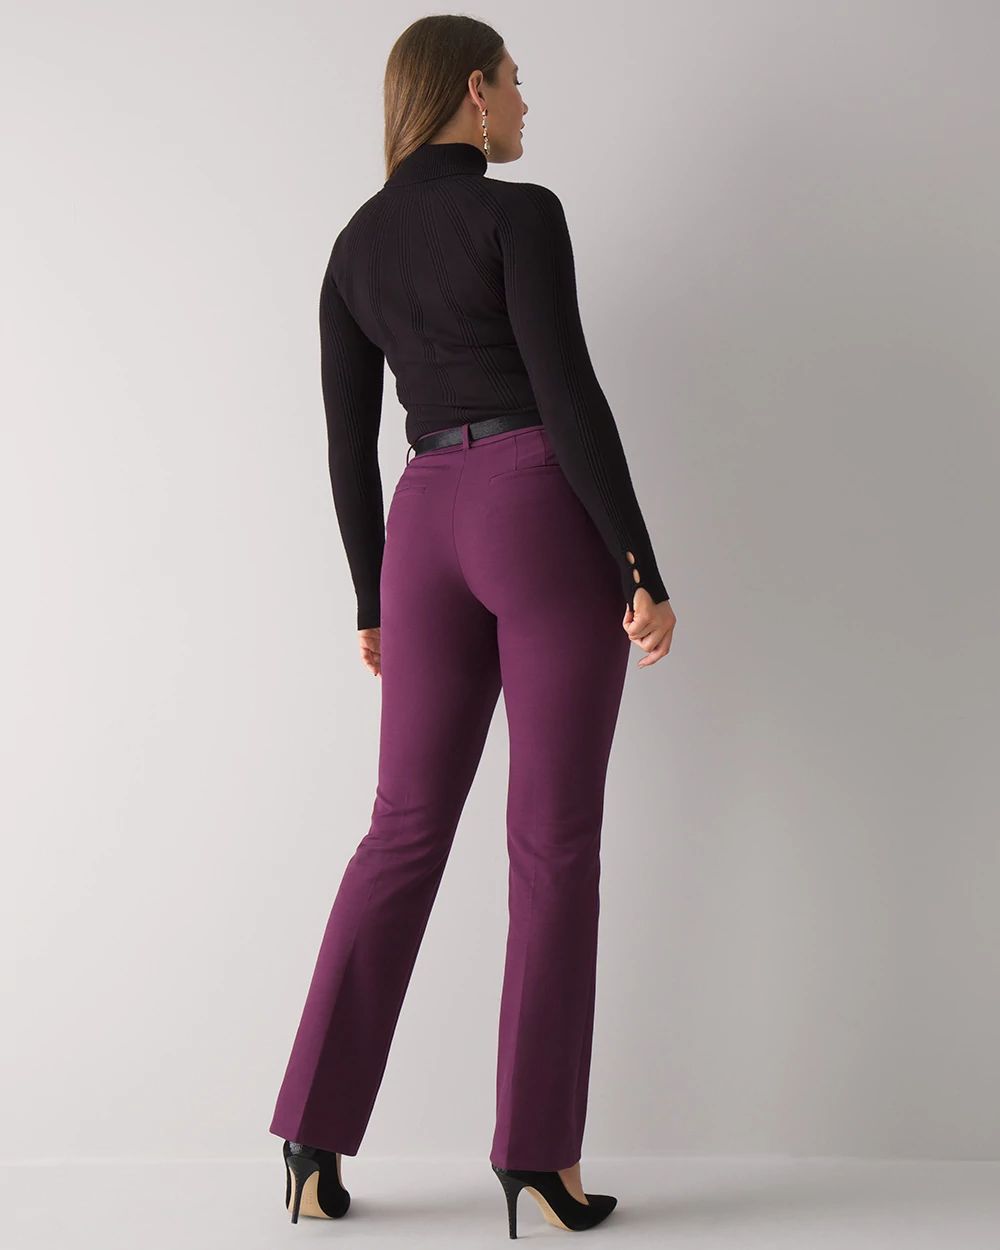 Curvy-Fit Comfort Stretch Slim Bootcut Pants click to view larger image.